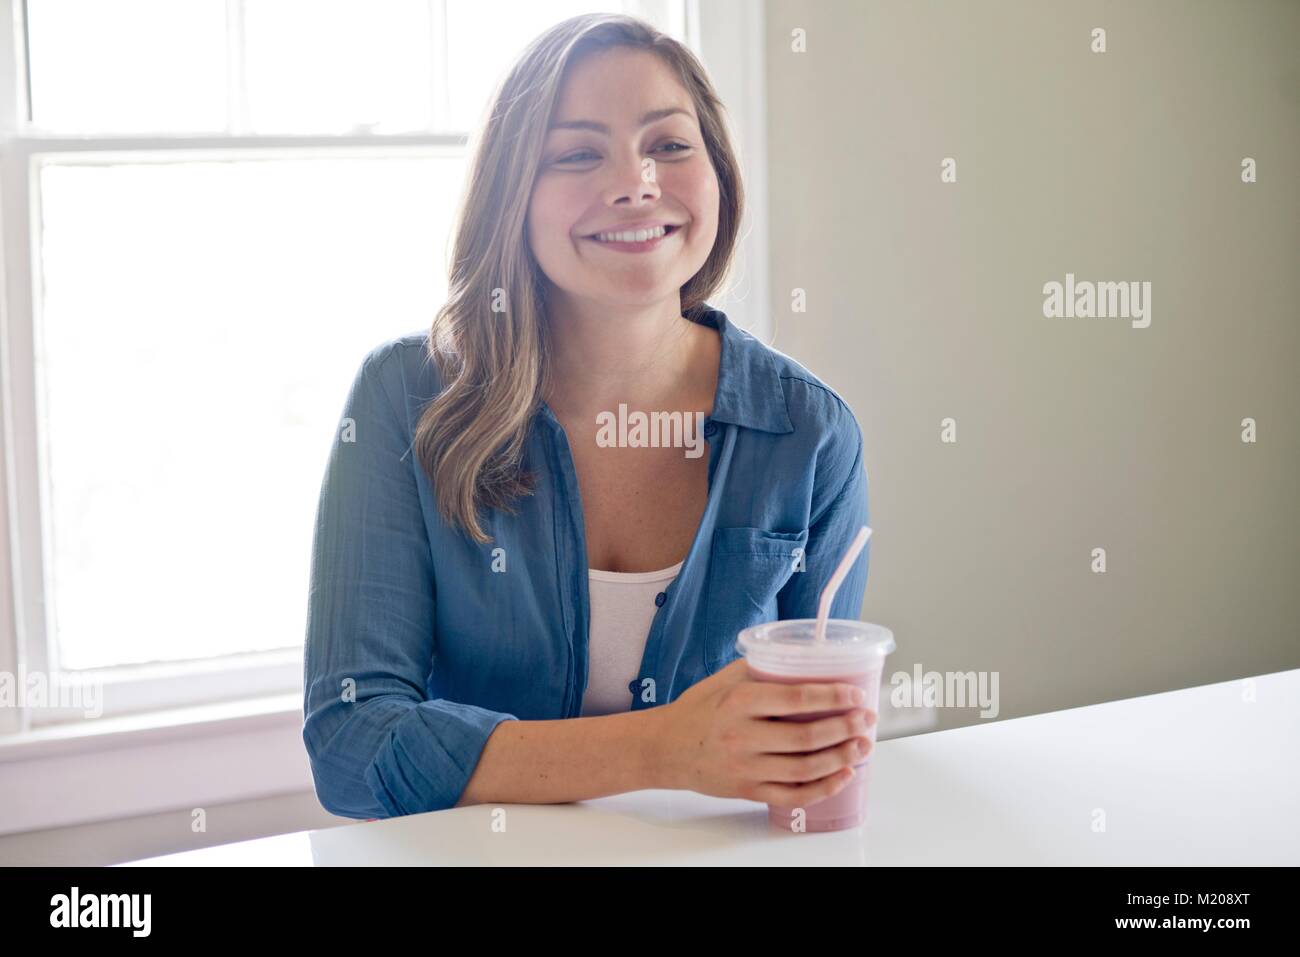 Portrait of young woman. Stock Photo